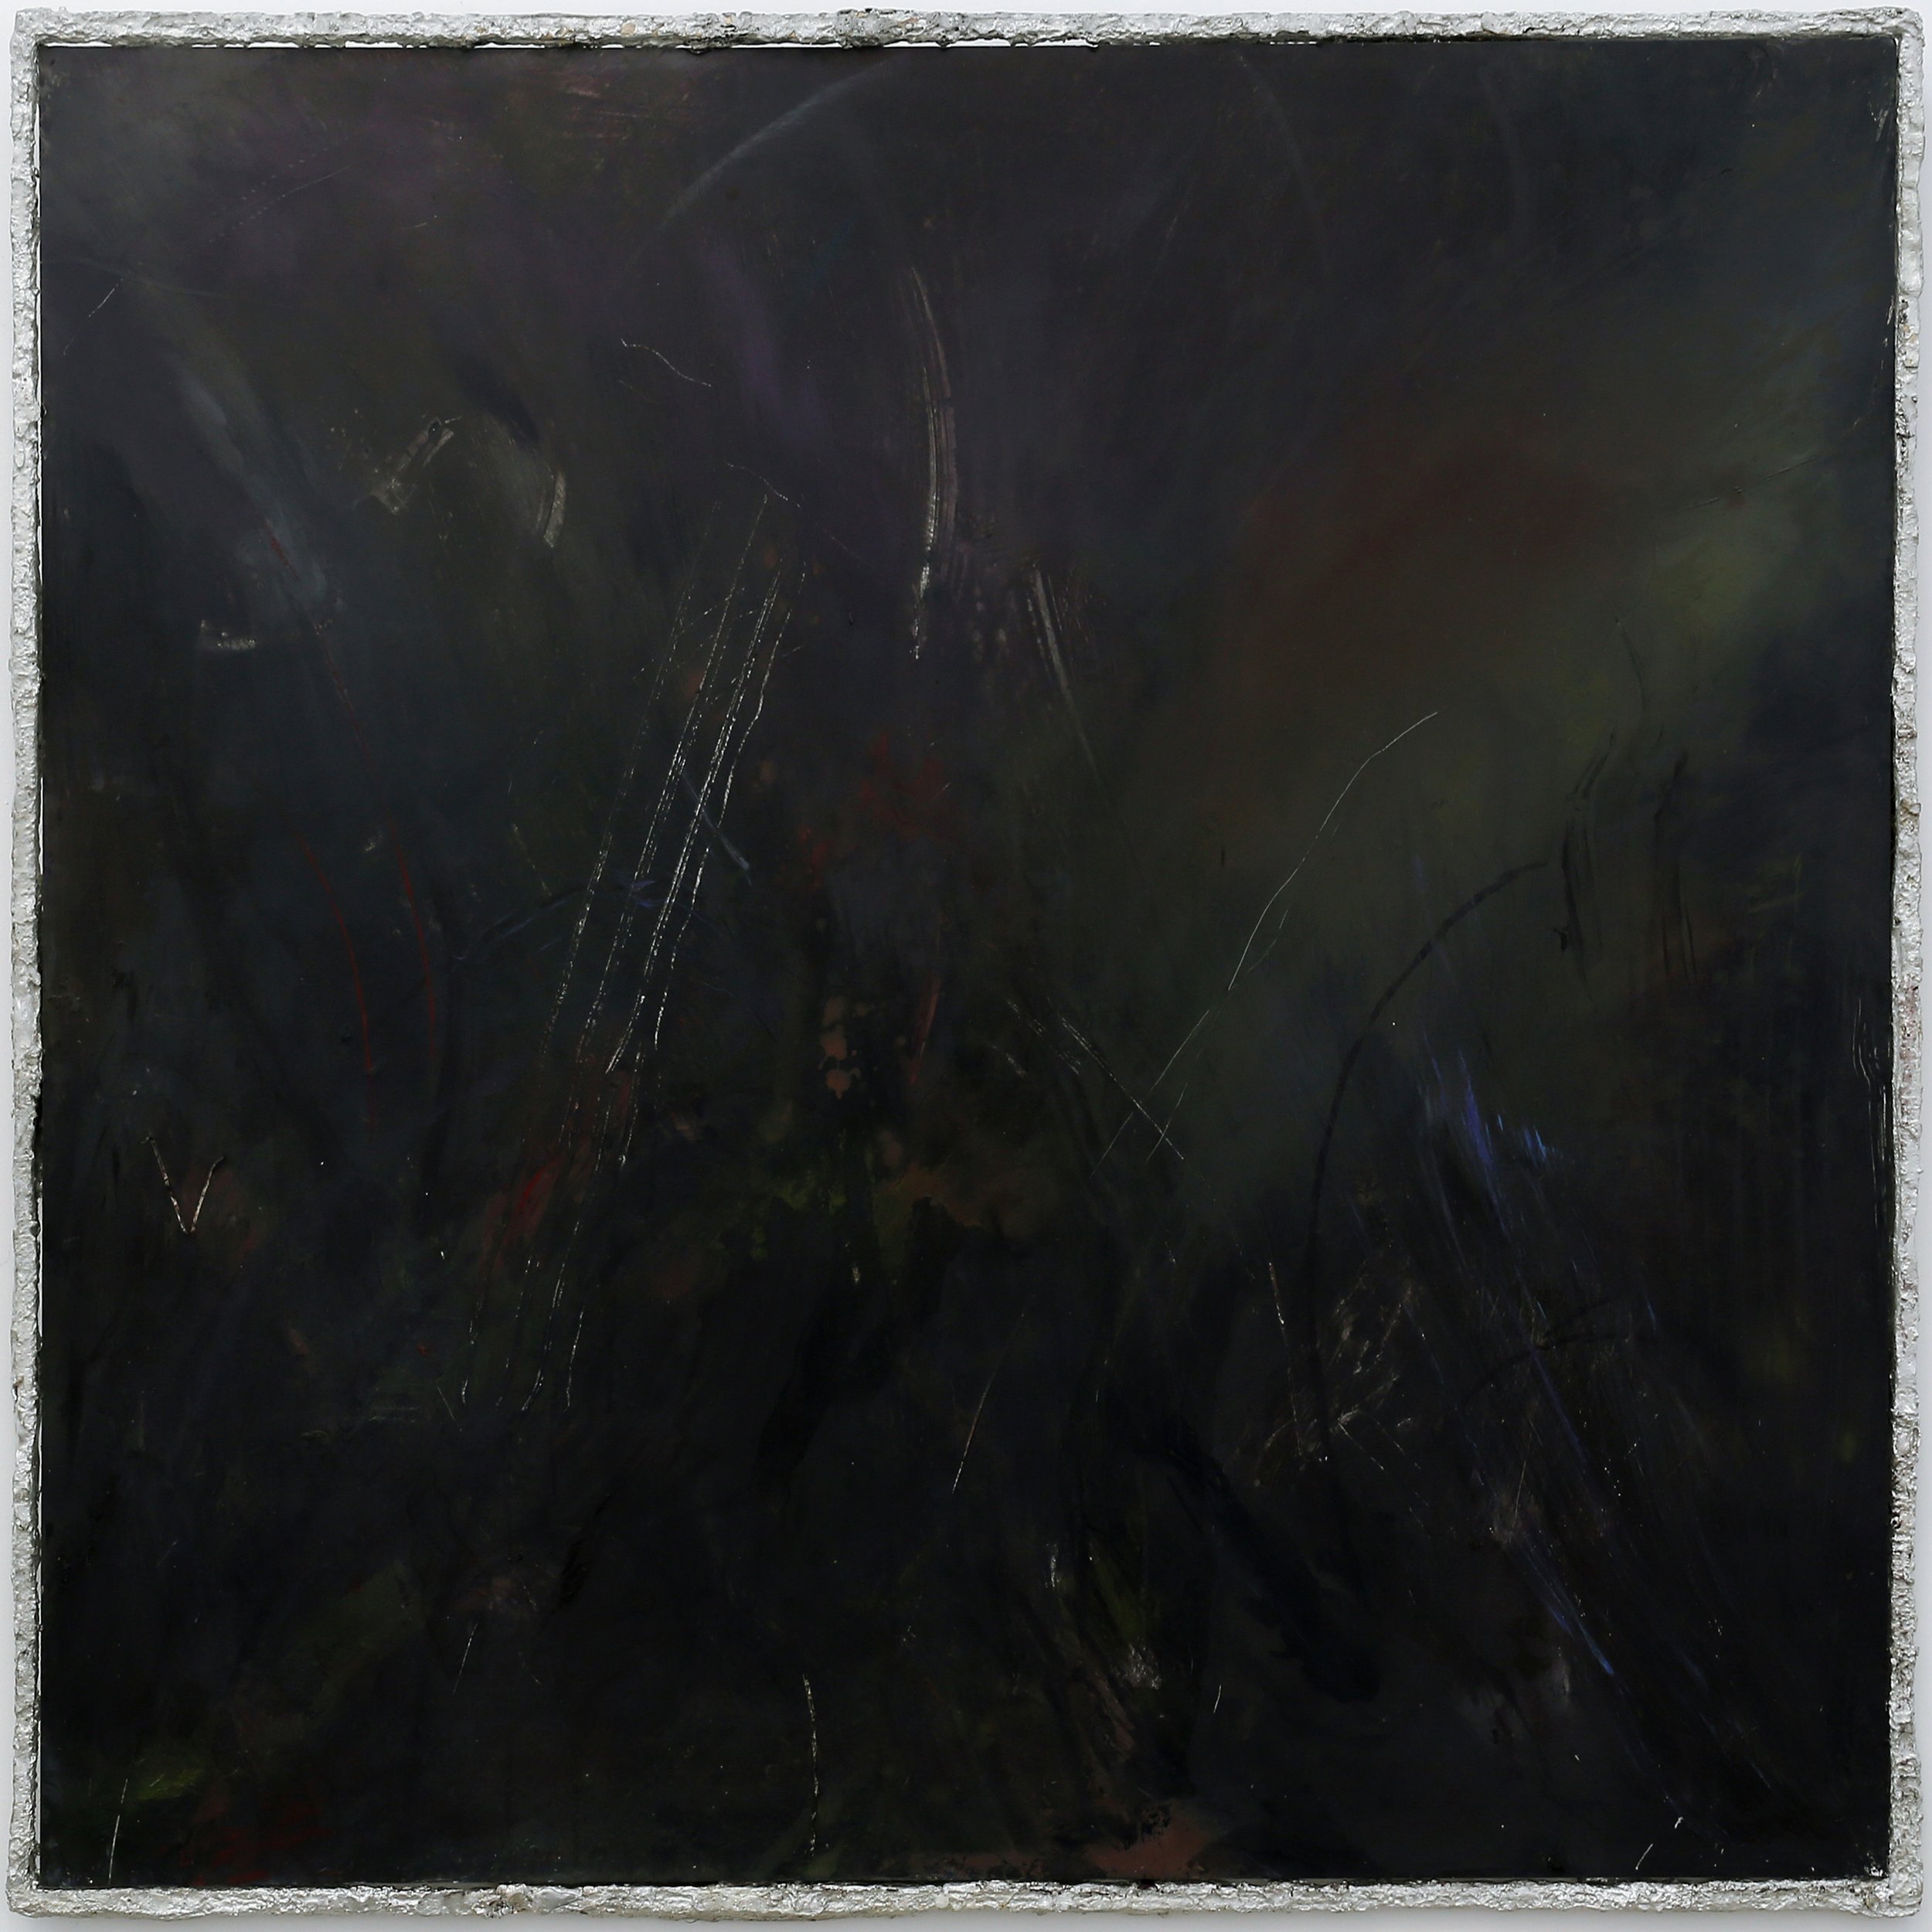  Watery Grave, 2022, Oil and acrylic on aluminium, pewter frame, 1260 x 1260  Photo credit: Vicki Piper 